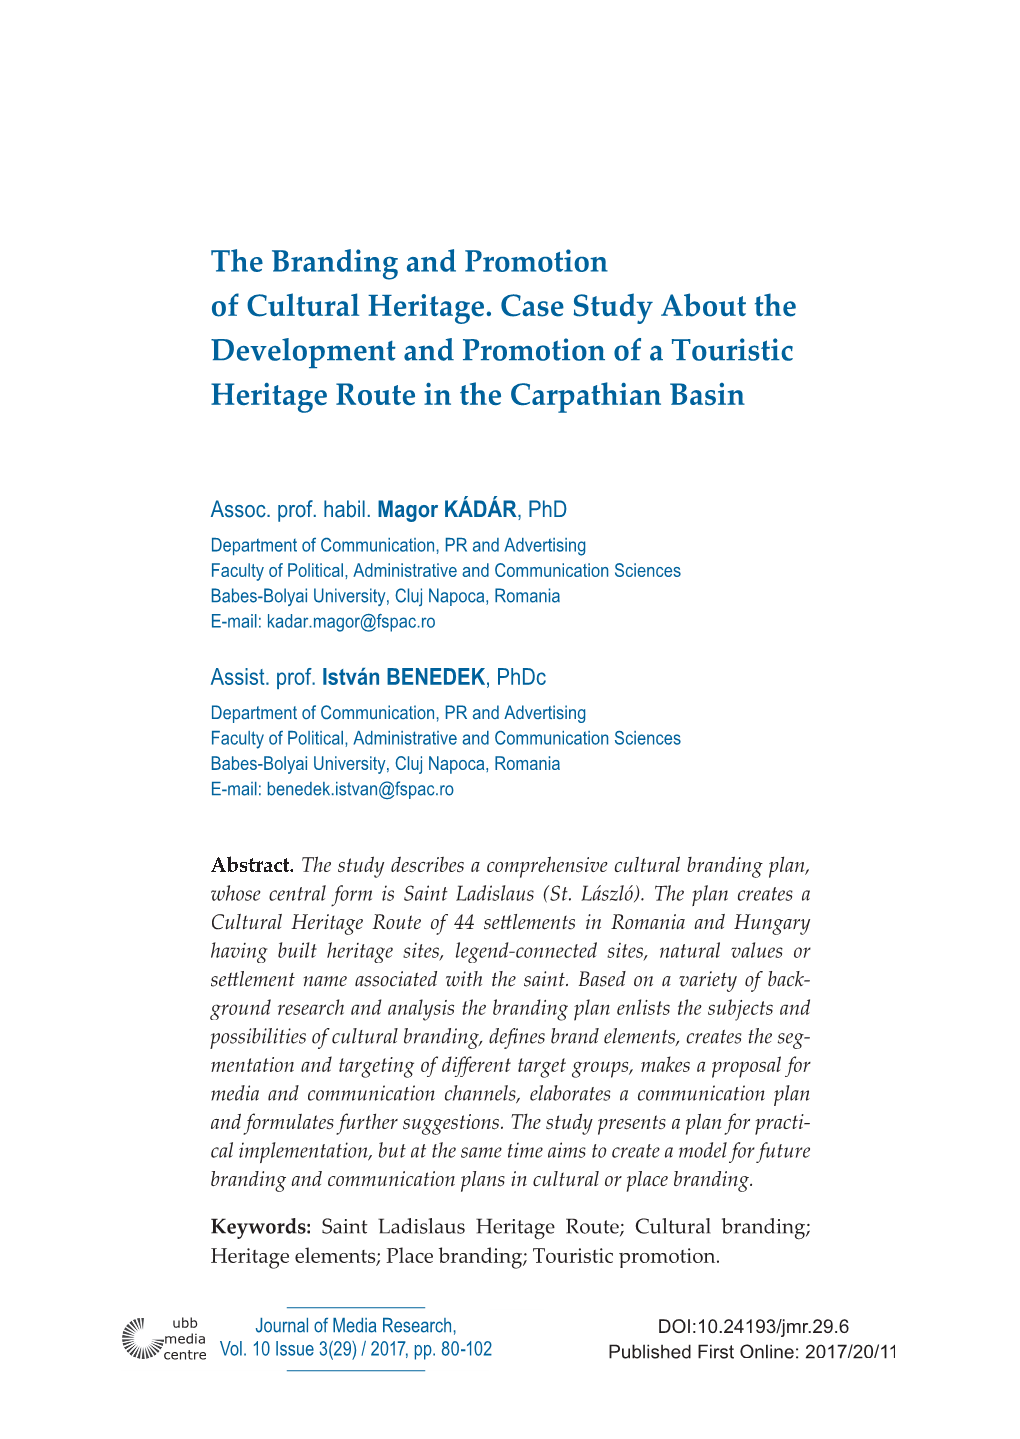 The Branding and Promotion of Cultural Heritage. Case Study About the Development and Promotion of a Touristic Heritage Route in the Carpathian Basin